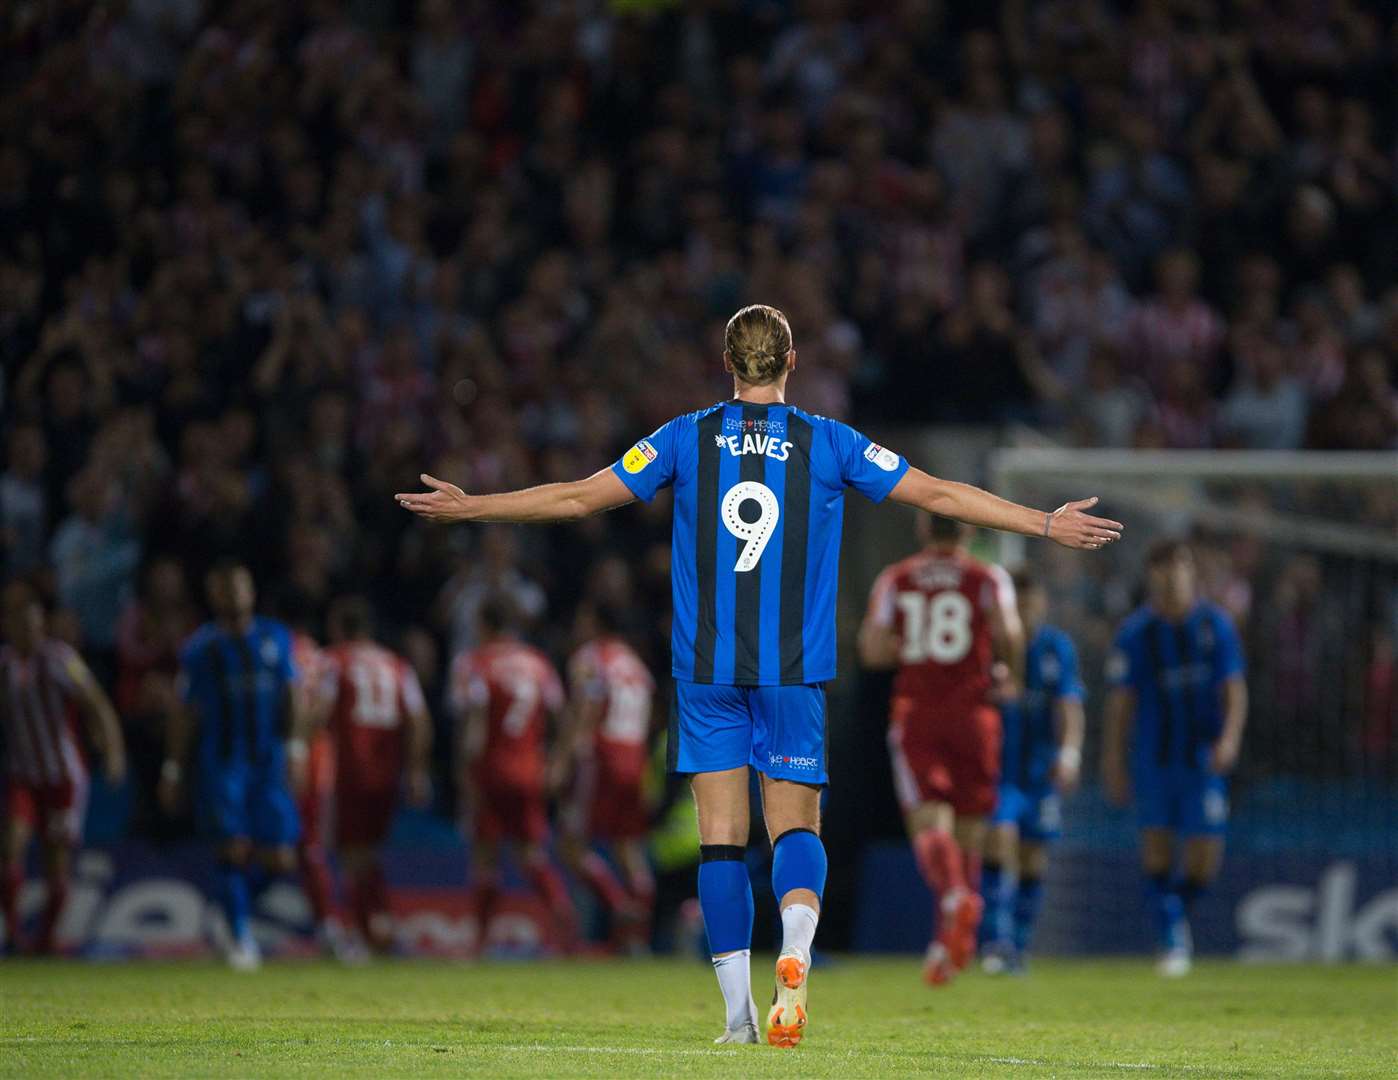 Gillingham FC 2018-19 Season.Gillingham vs Sunderland, Priestfield Stadium, 22nd August 2018.Tom Eaves reacts as they concede the 4th goal. (3778575)